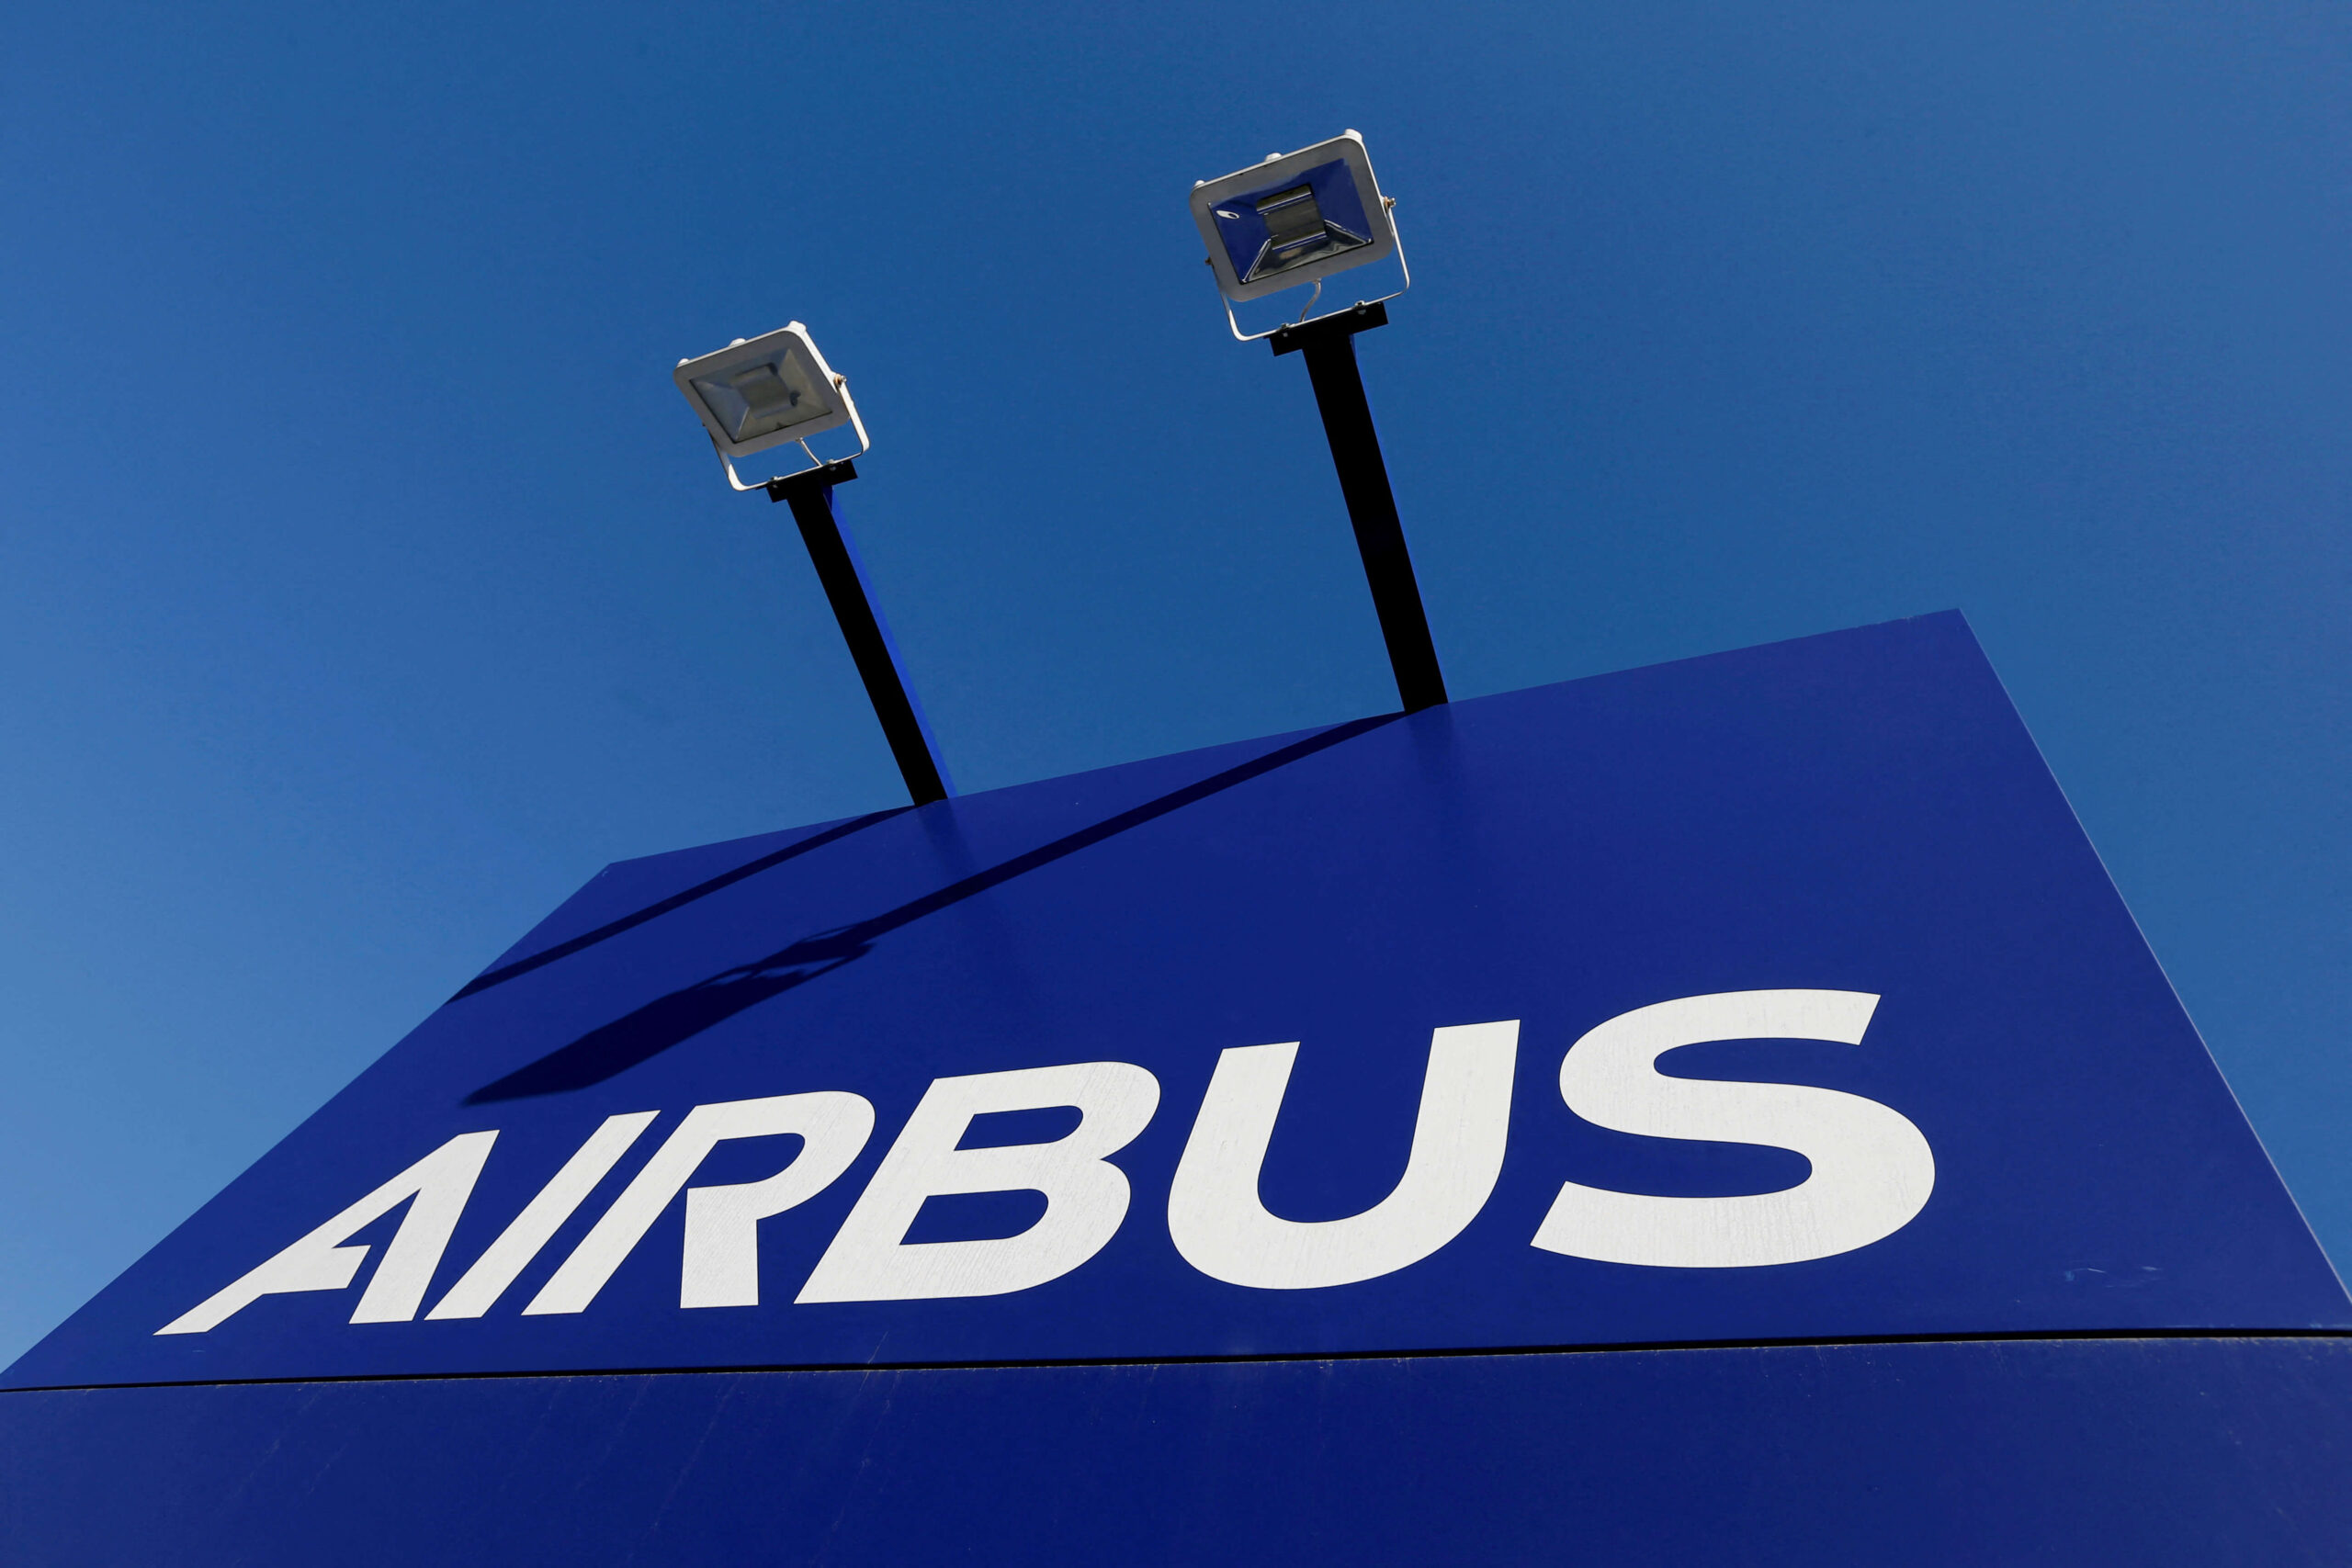 Airbus trials new wing designs in technology race with Boeing